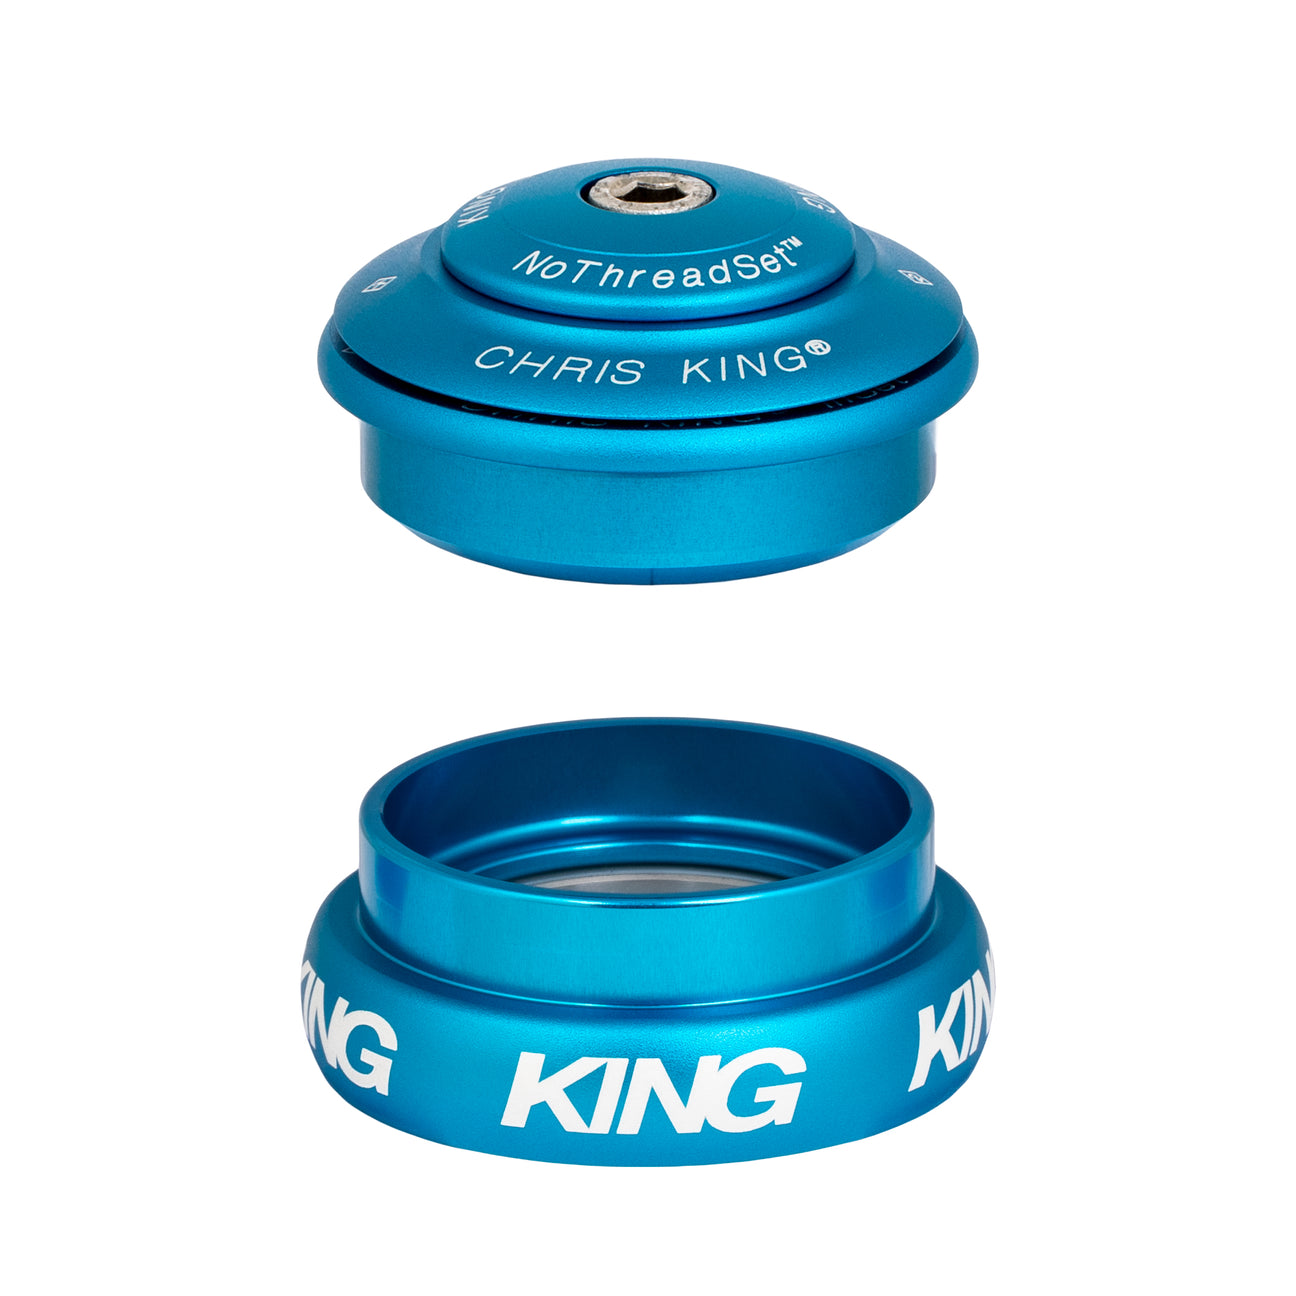 Chris King inset 8 headset in matte turquoise